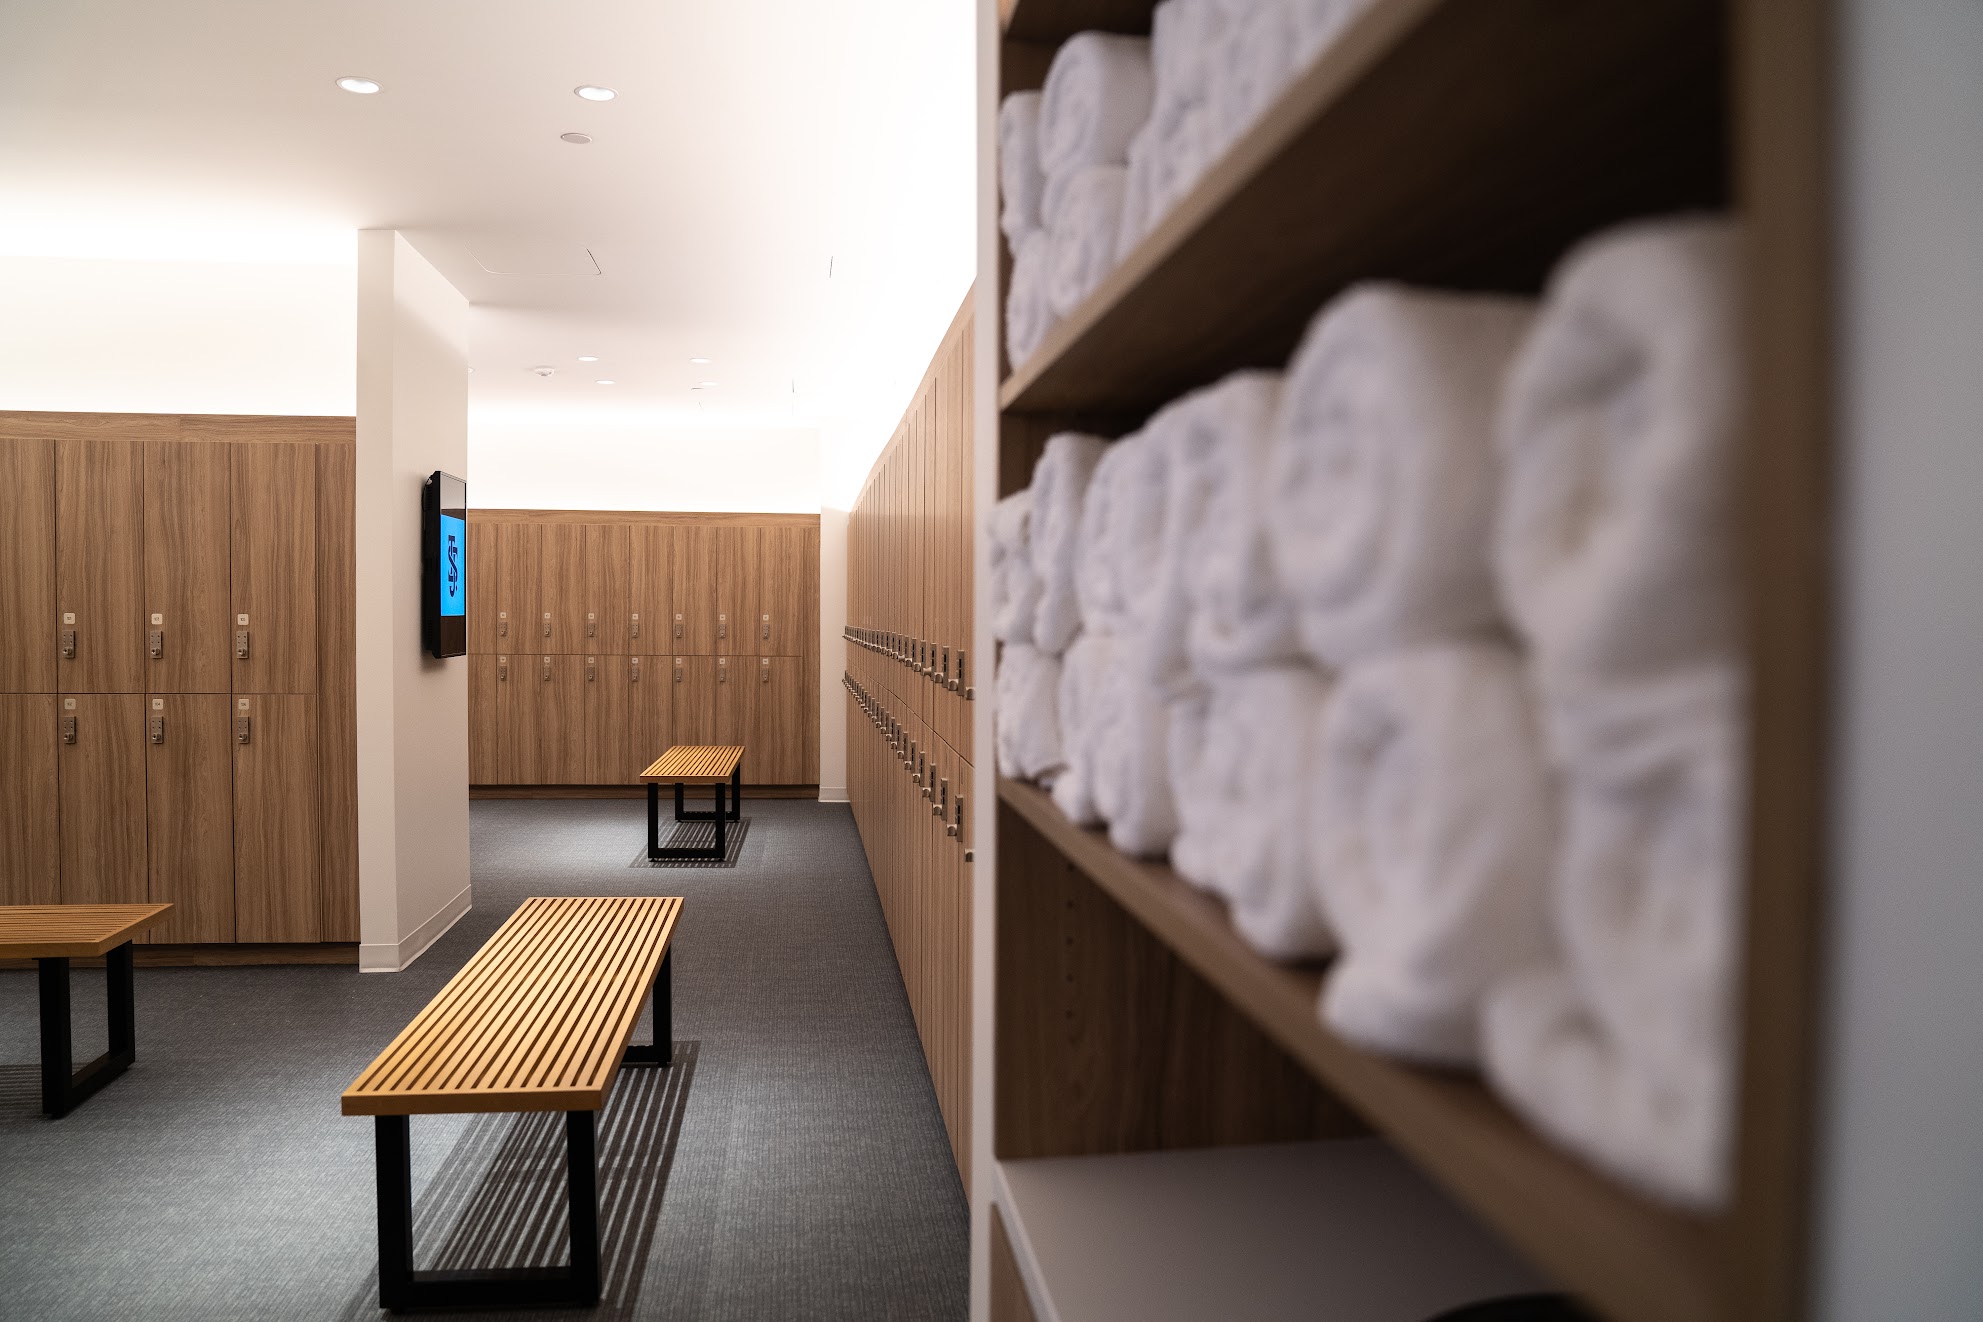 A locker room at the performance club. Photo courtesy of the St. James. 